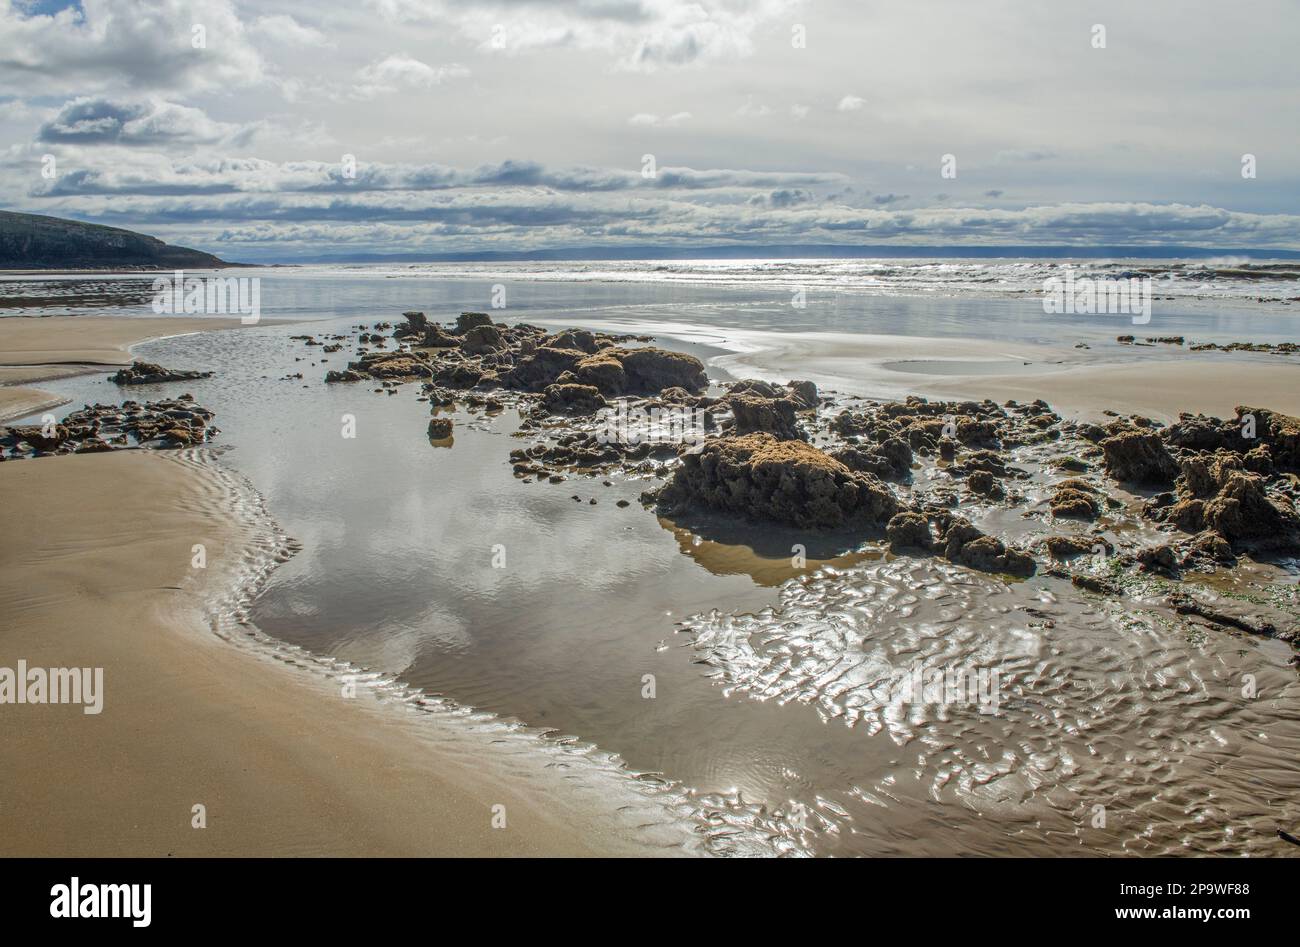 Mit Blick auf East Axross Dunraven Bay an der Glamorgan Heritage Coast in South Wales, Stockfoto